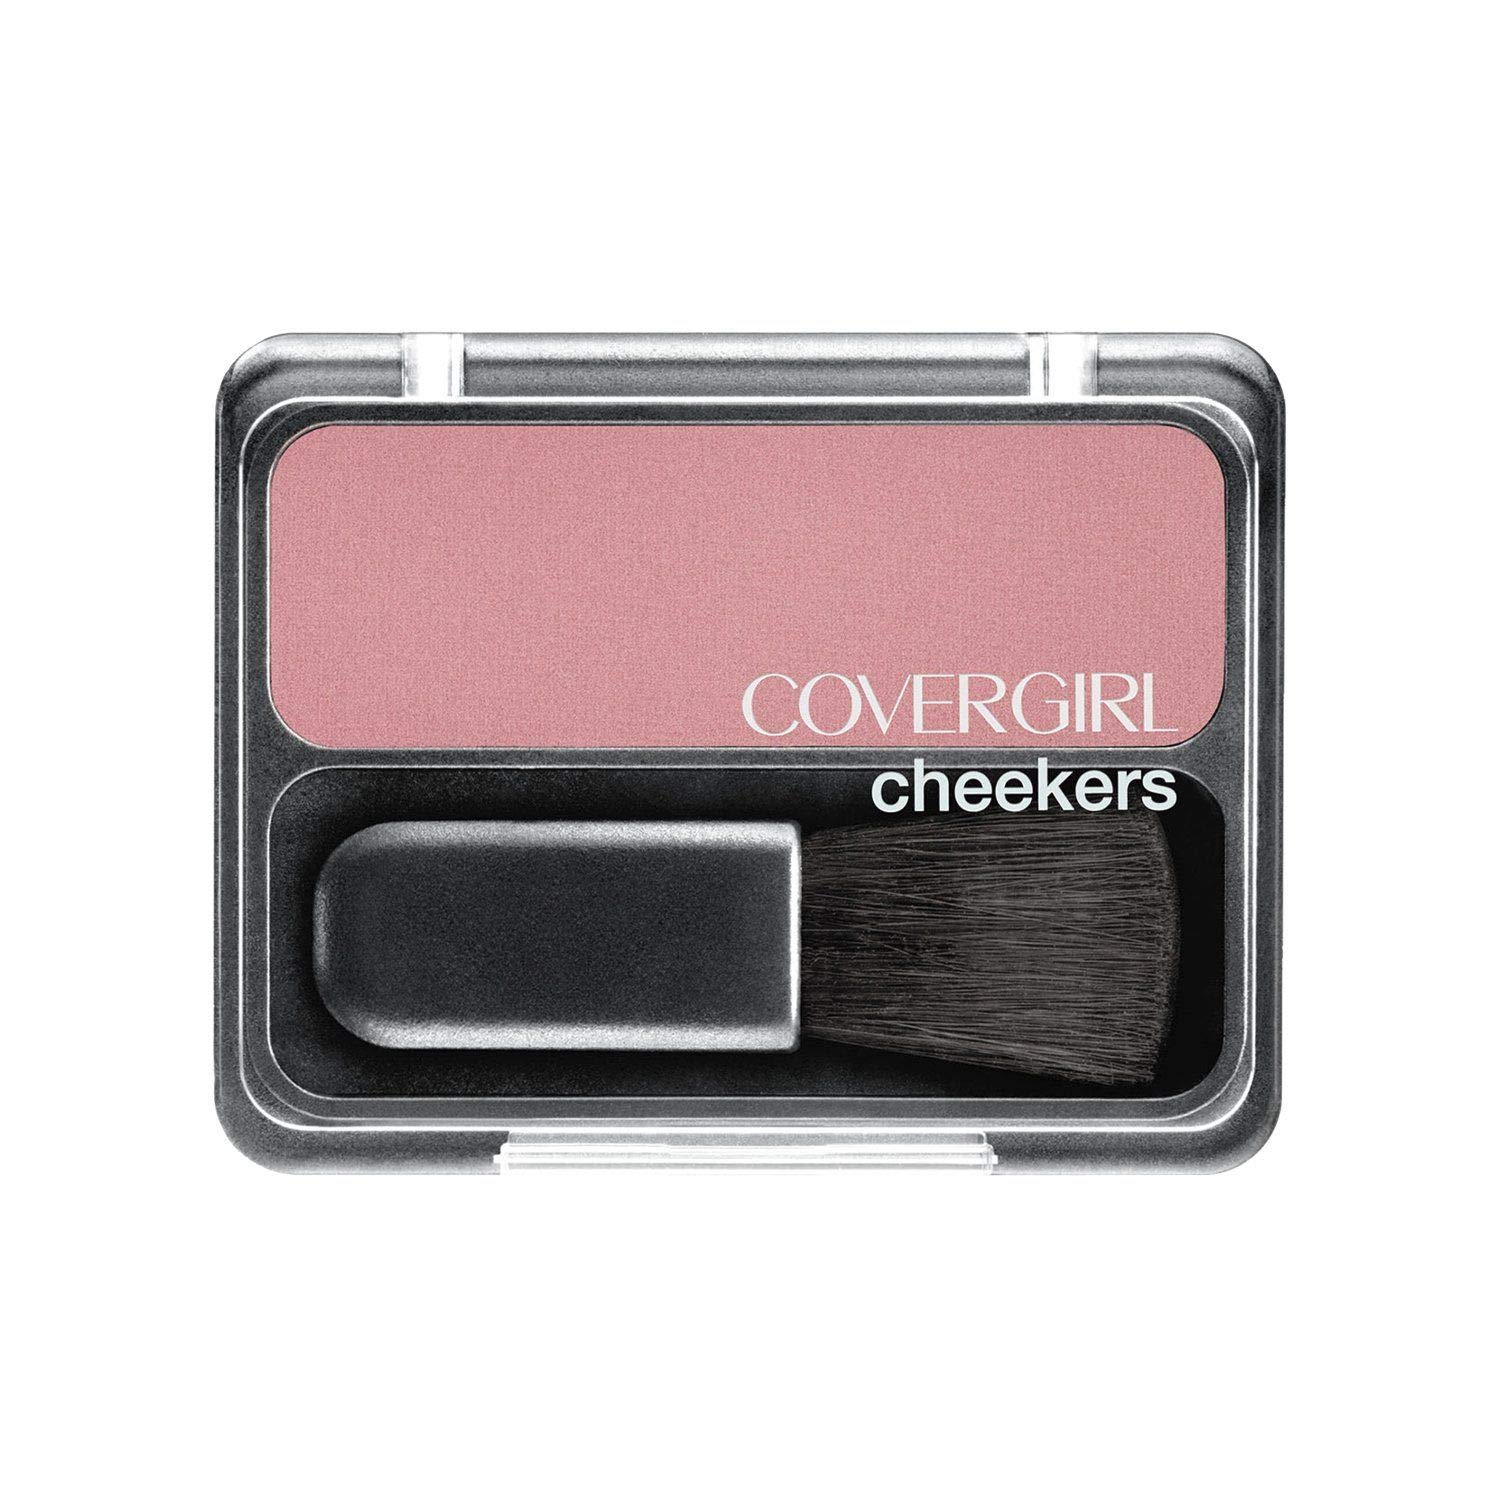 COVERGIRL Cheekers Blendable Powder Blush Natural Twinkle.12 oz, 1 Count